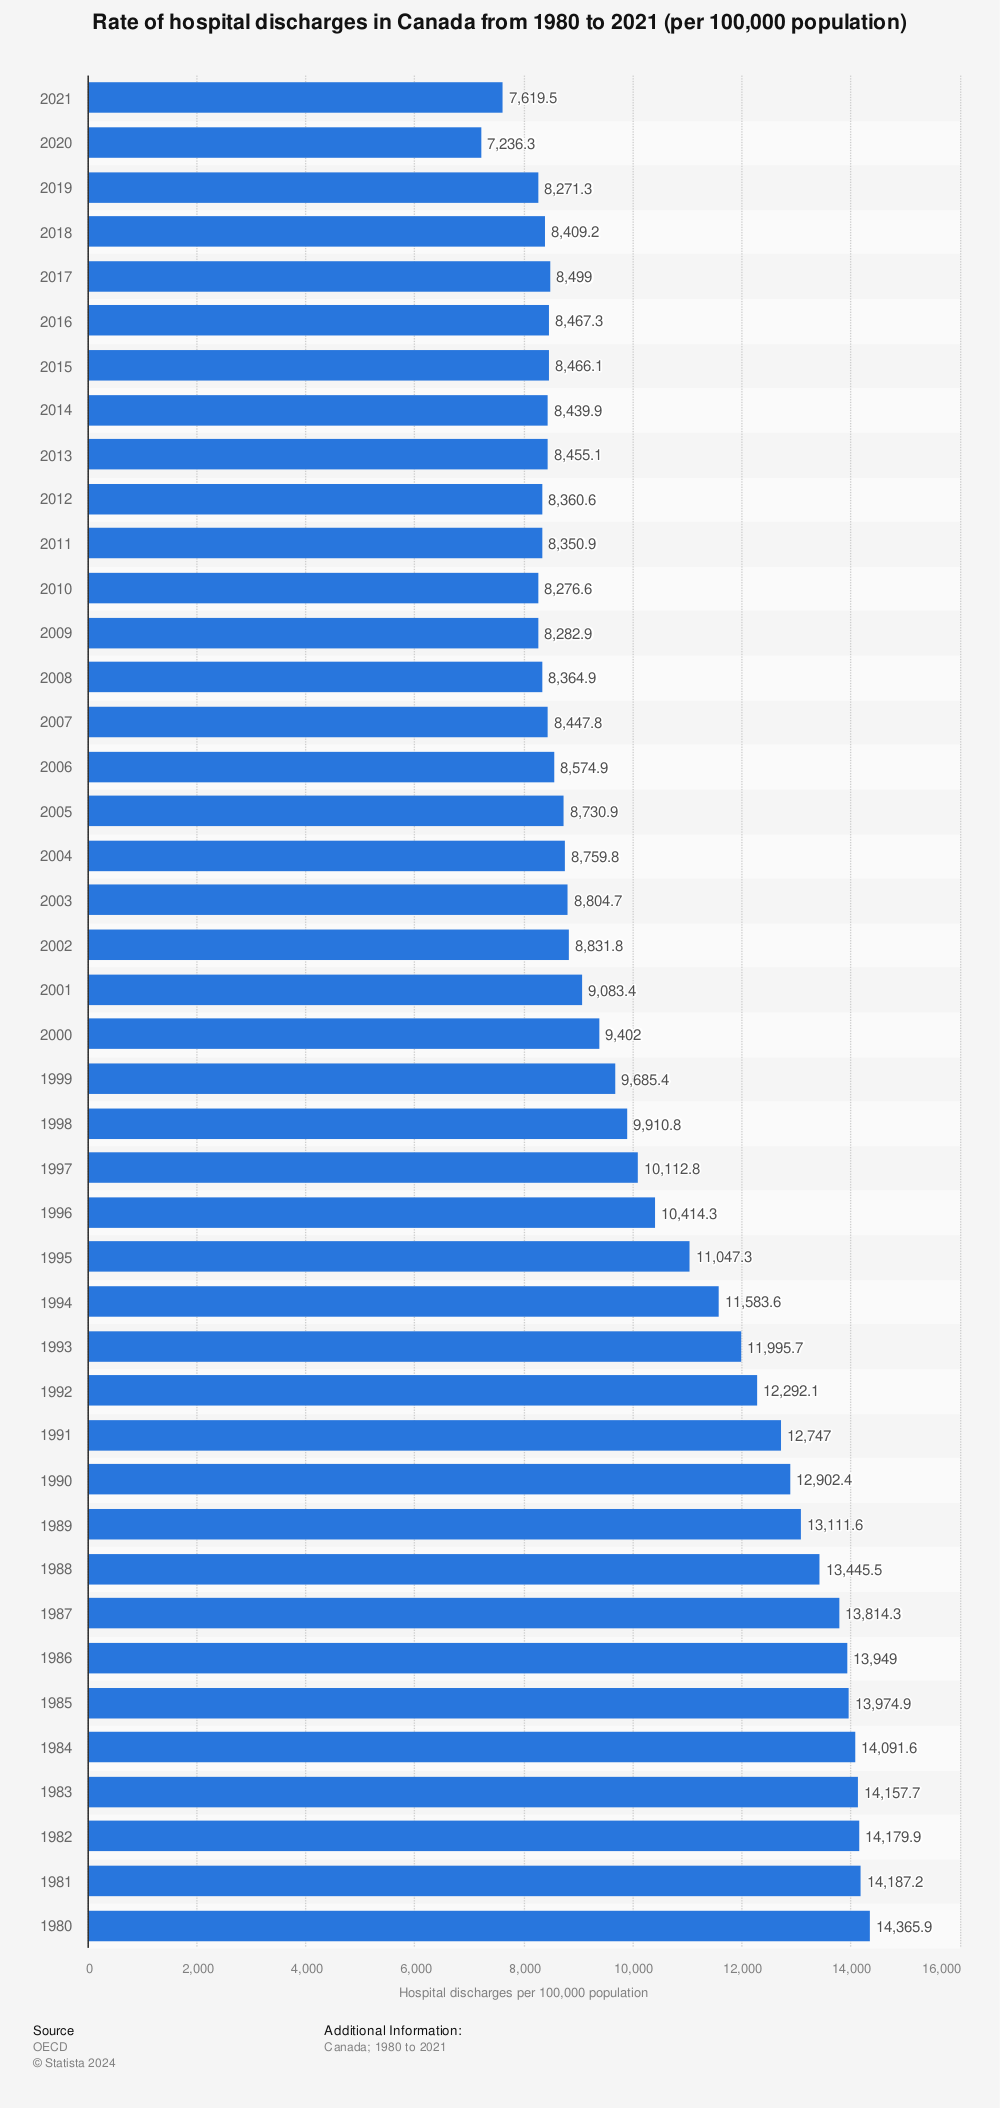 Statistic: Rate of hospital discharges in Canada from 1980 to 2020 (per 100,000 population) | Statista